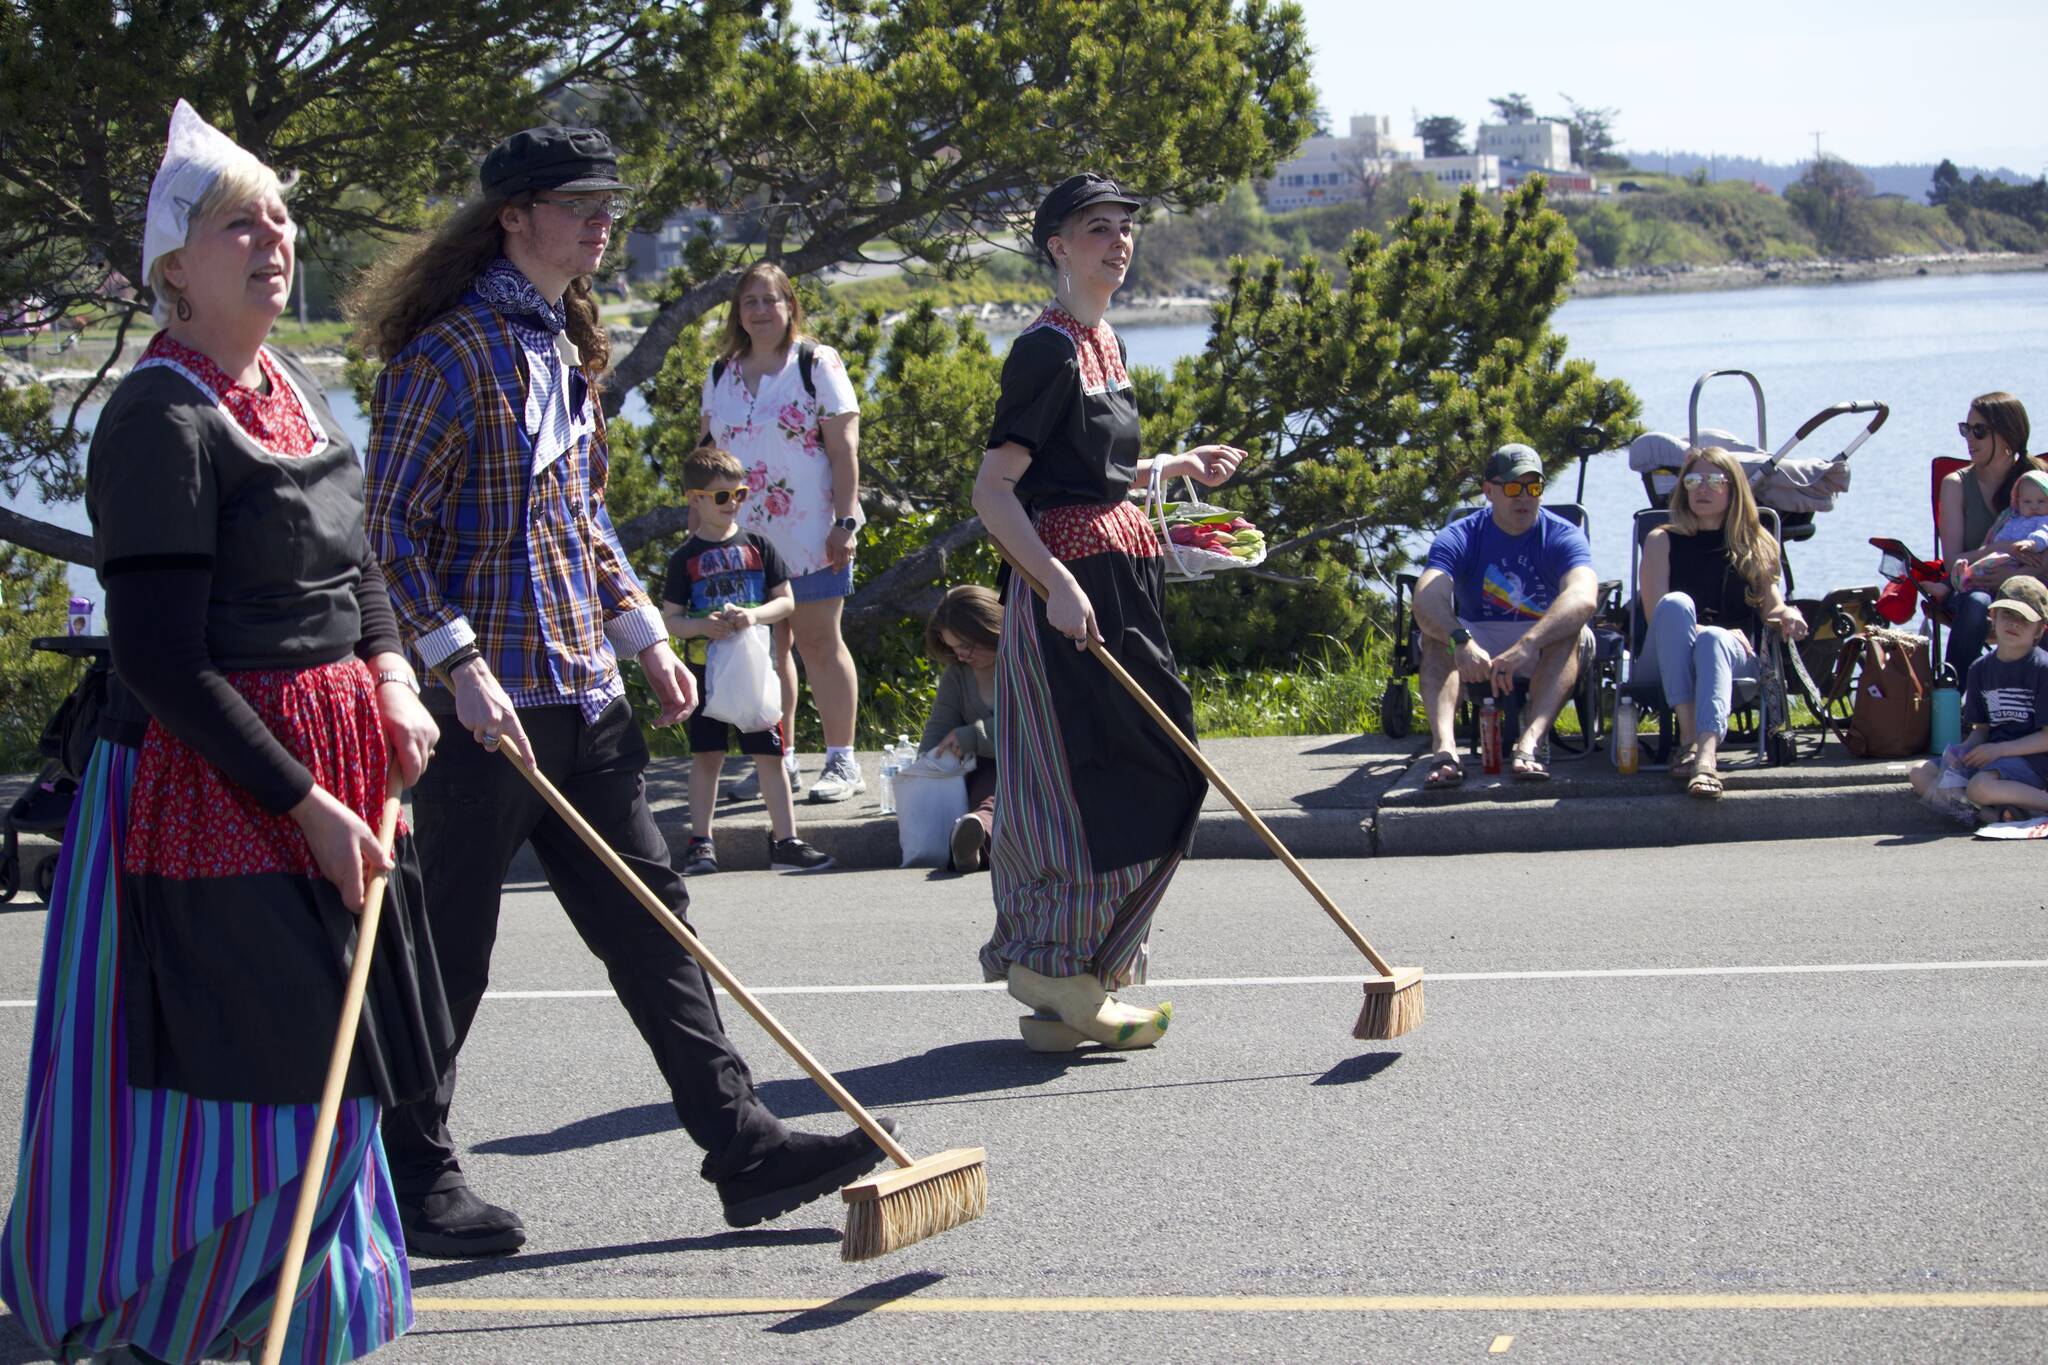 Photos by Rachel Rosen/Whidbey News-Times
People dressed in traditional Dutch clothing sweep the street.